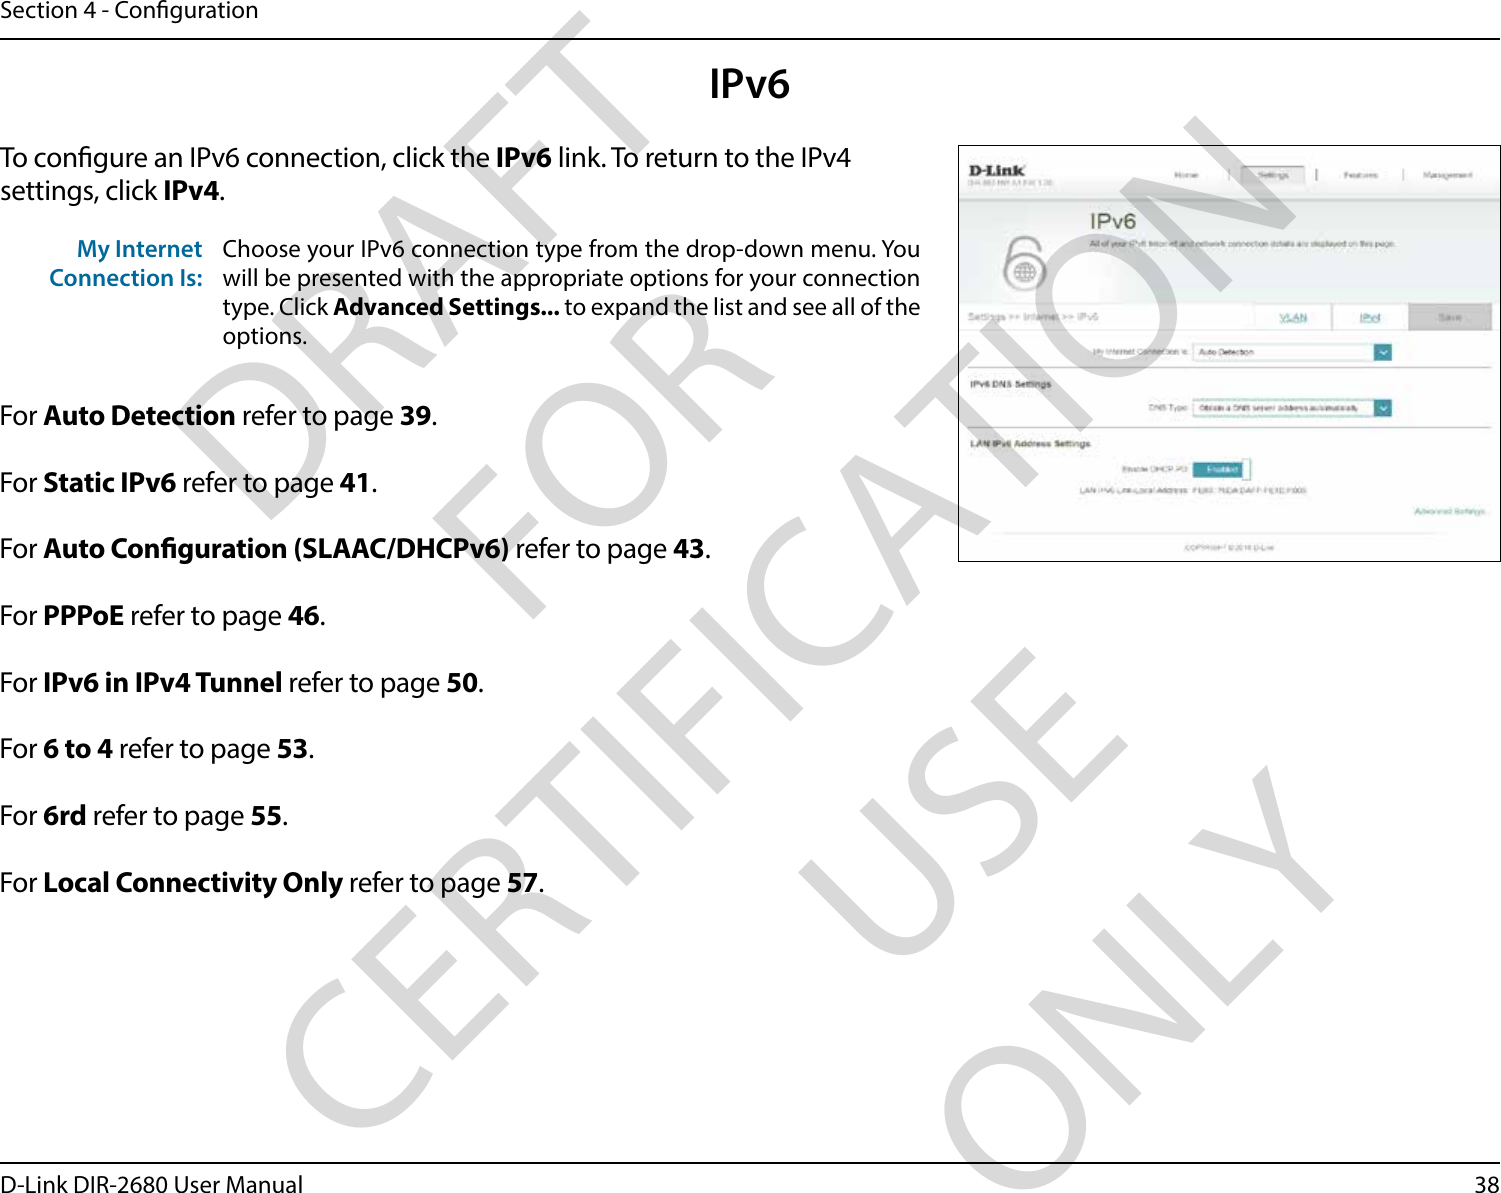 38D-Link DIR-2680 User ManualSection 4 - CongurationIPv6To congure an IPv6 connection, click the IPv6 link. To return to the IPv4 settings, click IPv4.For Auto Detection refer to page 39.For Static IPv6 refer to page 41.For Auto Conguration (SLAAC/DHCPv6) refer to page 43.For PPPoE refer to page 46.For IPv6 in IPv4 Tunnel refer to page 50.For 6 to 4 refer to page 53.For 6rd refer to page 55.For Local Connectivity Only refer to page 57.My Internet Connection Is:Choose your IPv6 connection type from the drop-down menu. You will be presented with the appropriate options for your connection type. Click Advanced Settings... to expand the list and see all of the options.DRAFT FOR CERTIFICATION USE ONLY